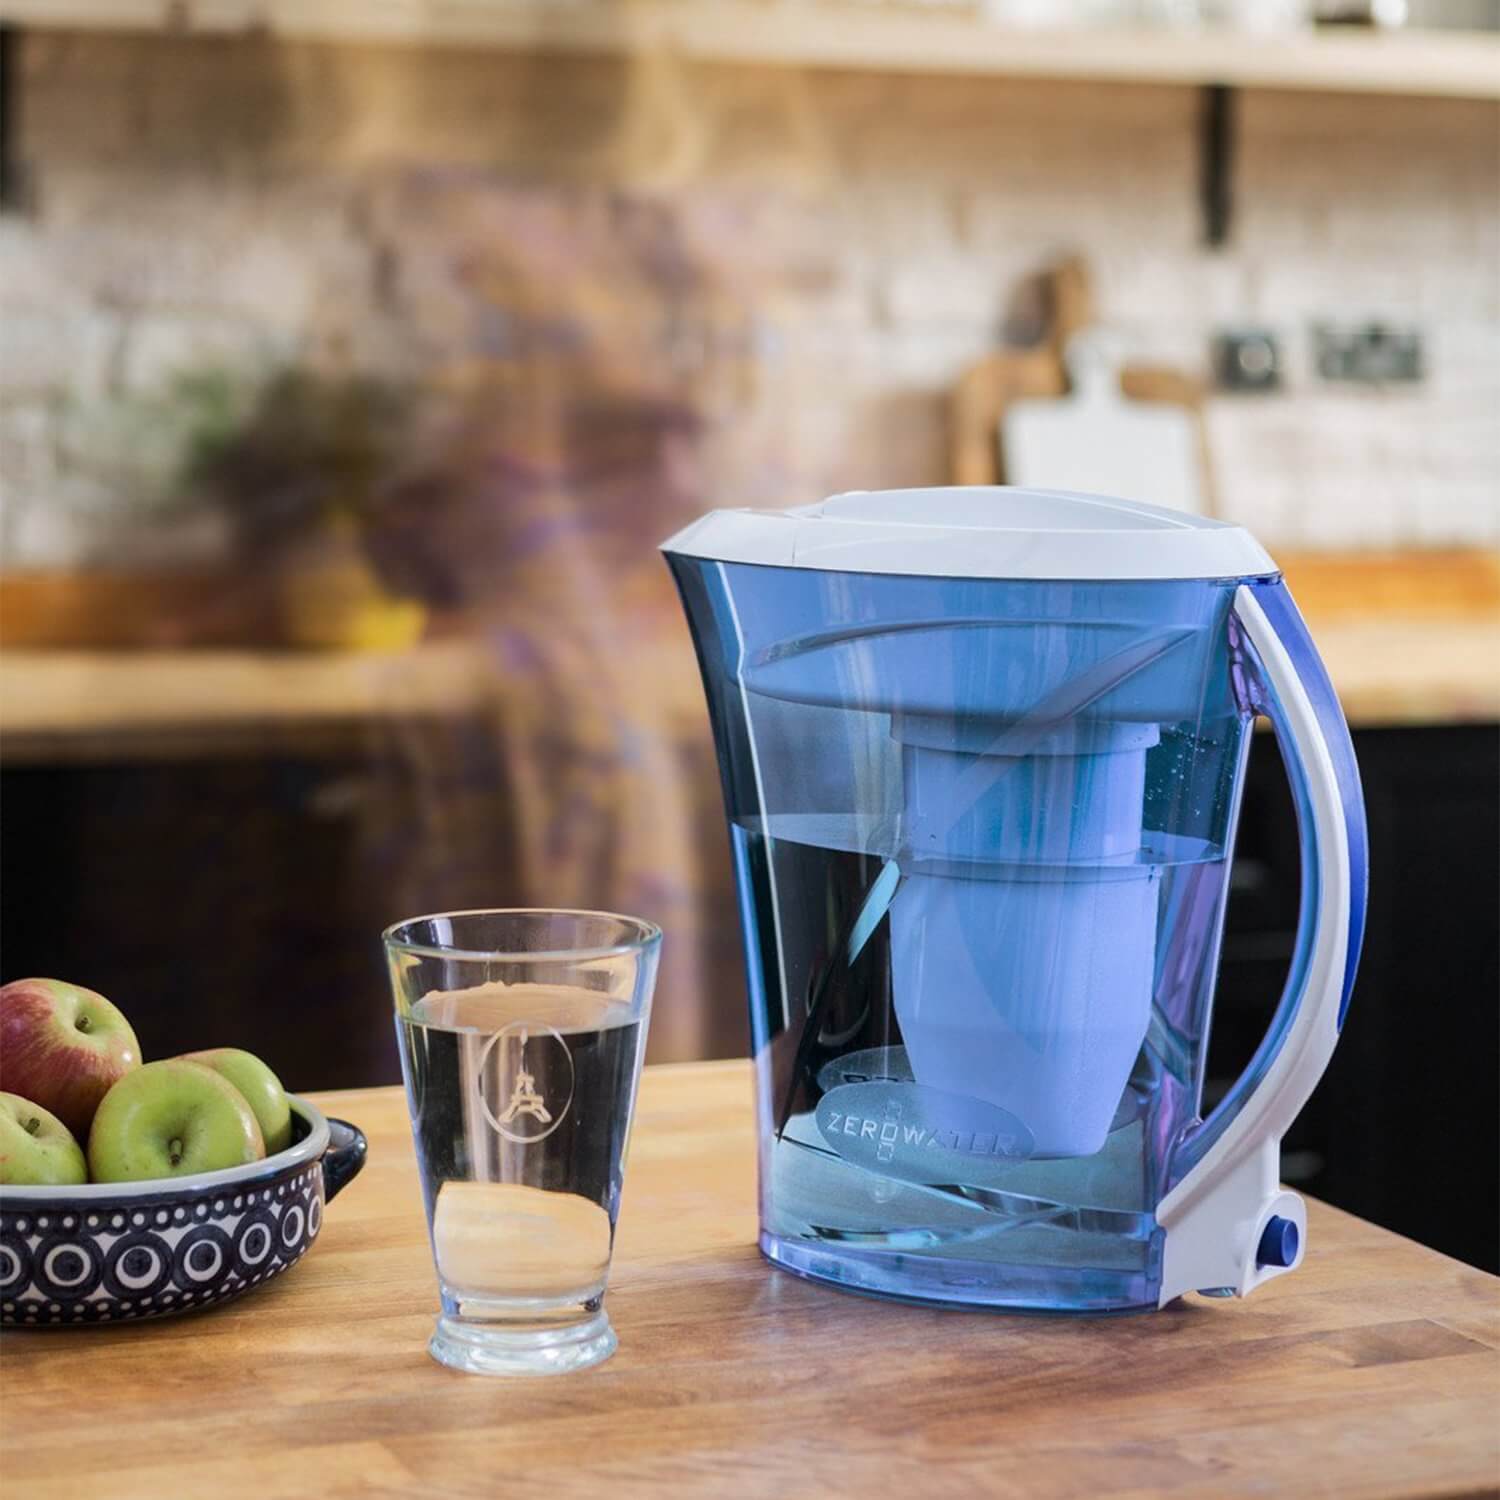 zerowater-10-cup-ready-pour-pitcher-2.jpg